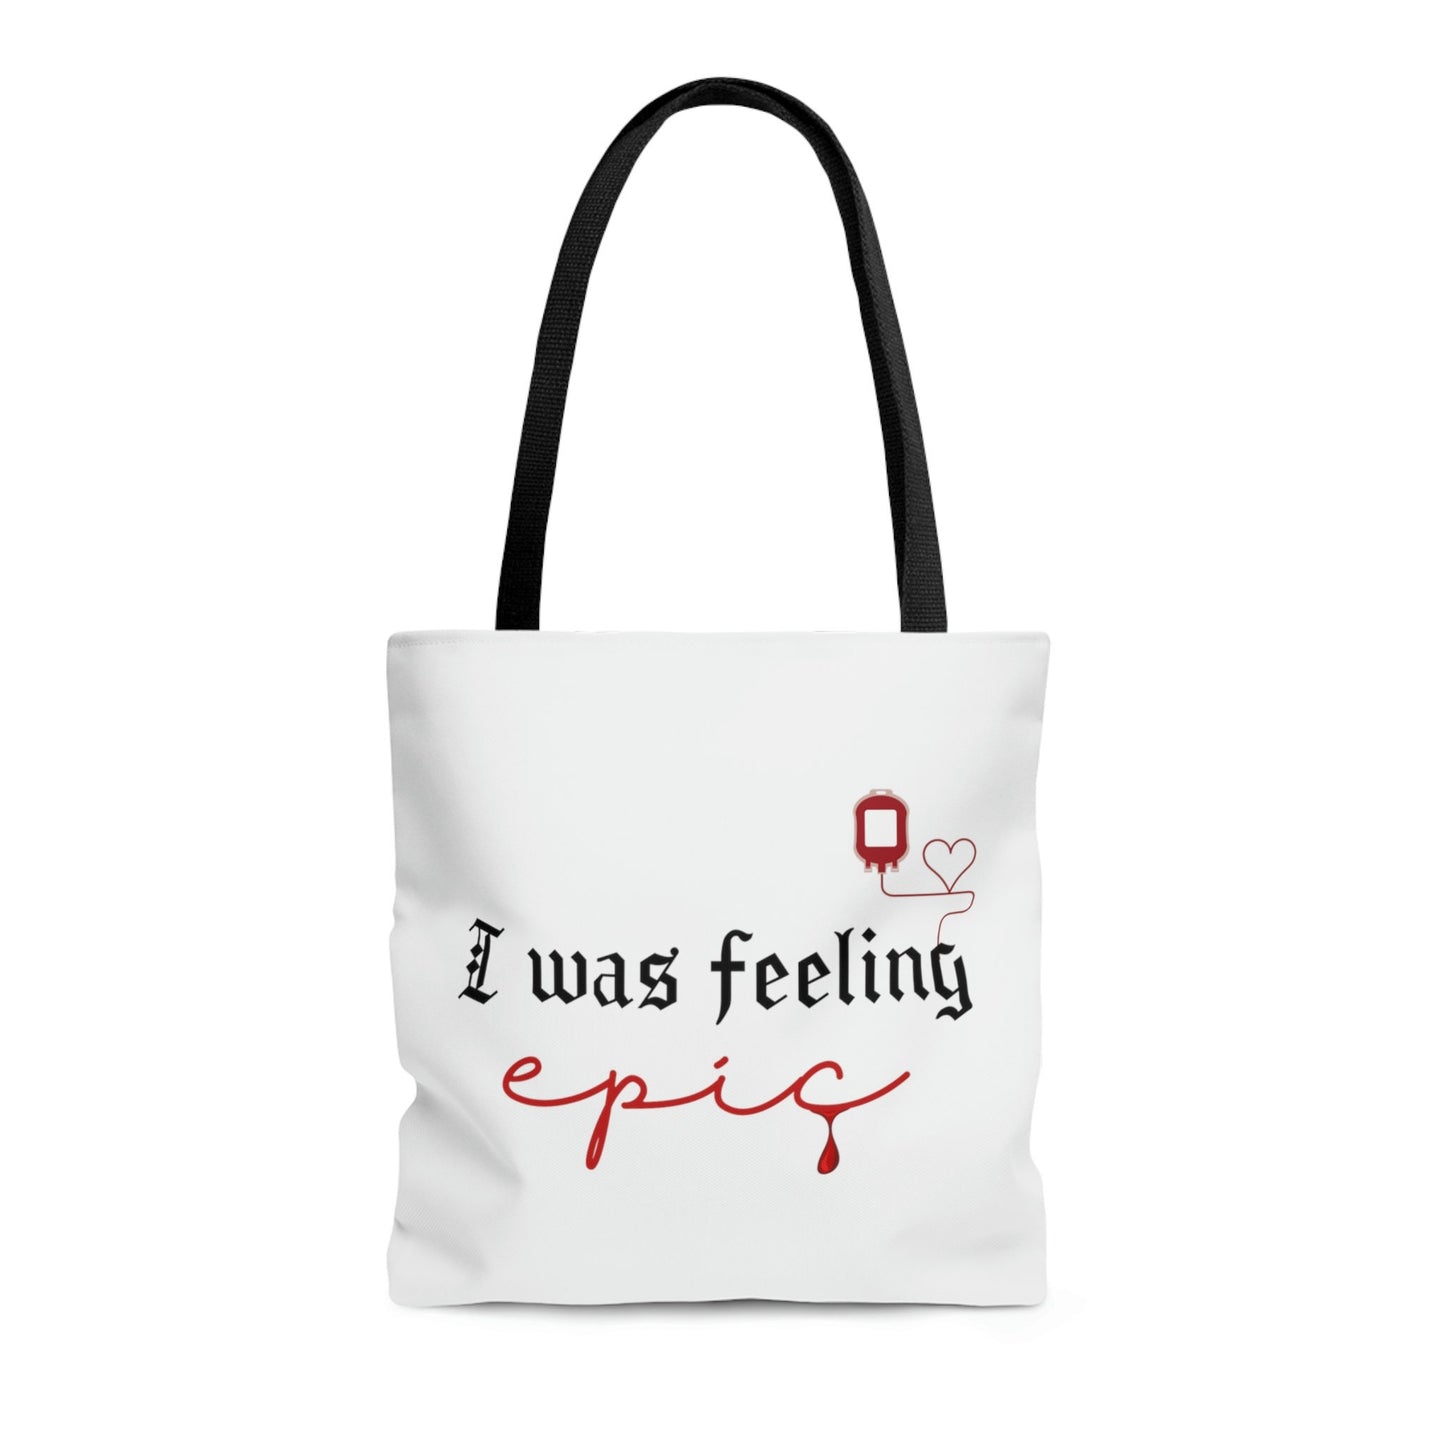 I was feeling epic tote bag, TVD Tote Bag, The vampire diaries merch, TVD merch, The Salvatore brothers, tvd fan gift, Damon Salvatore